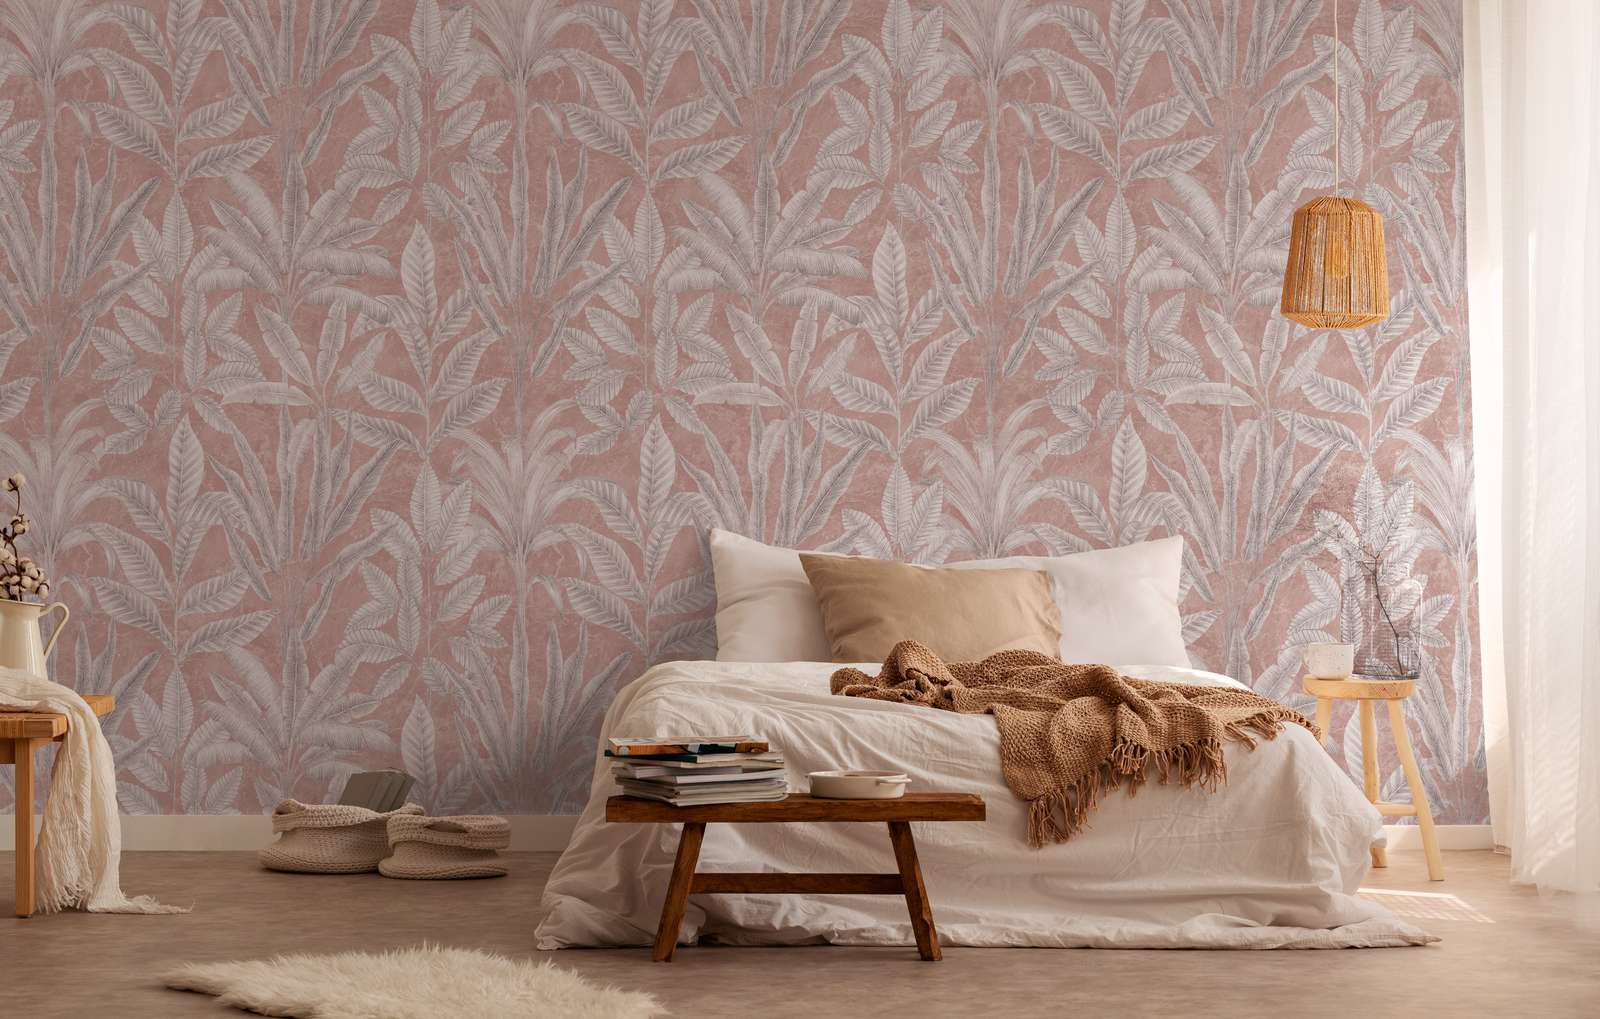             Non-woven wallpaper with large leaves in light colours - pink, grey, white
        